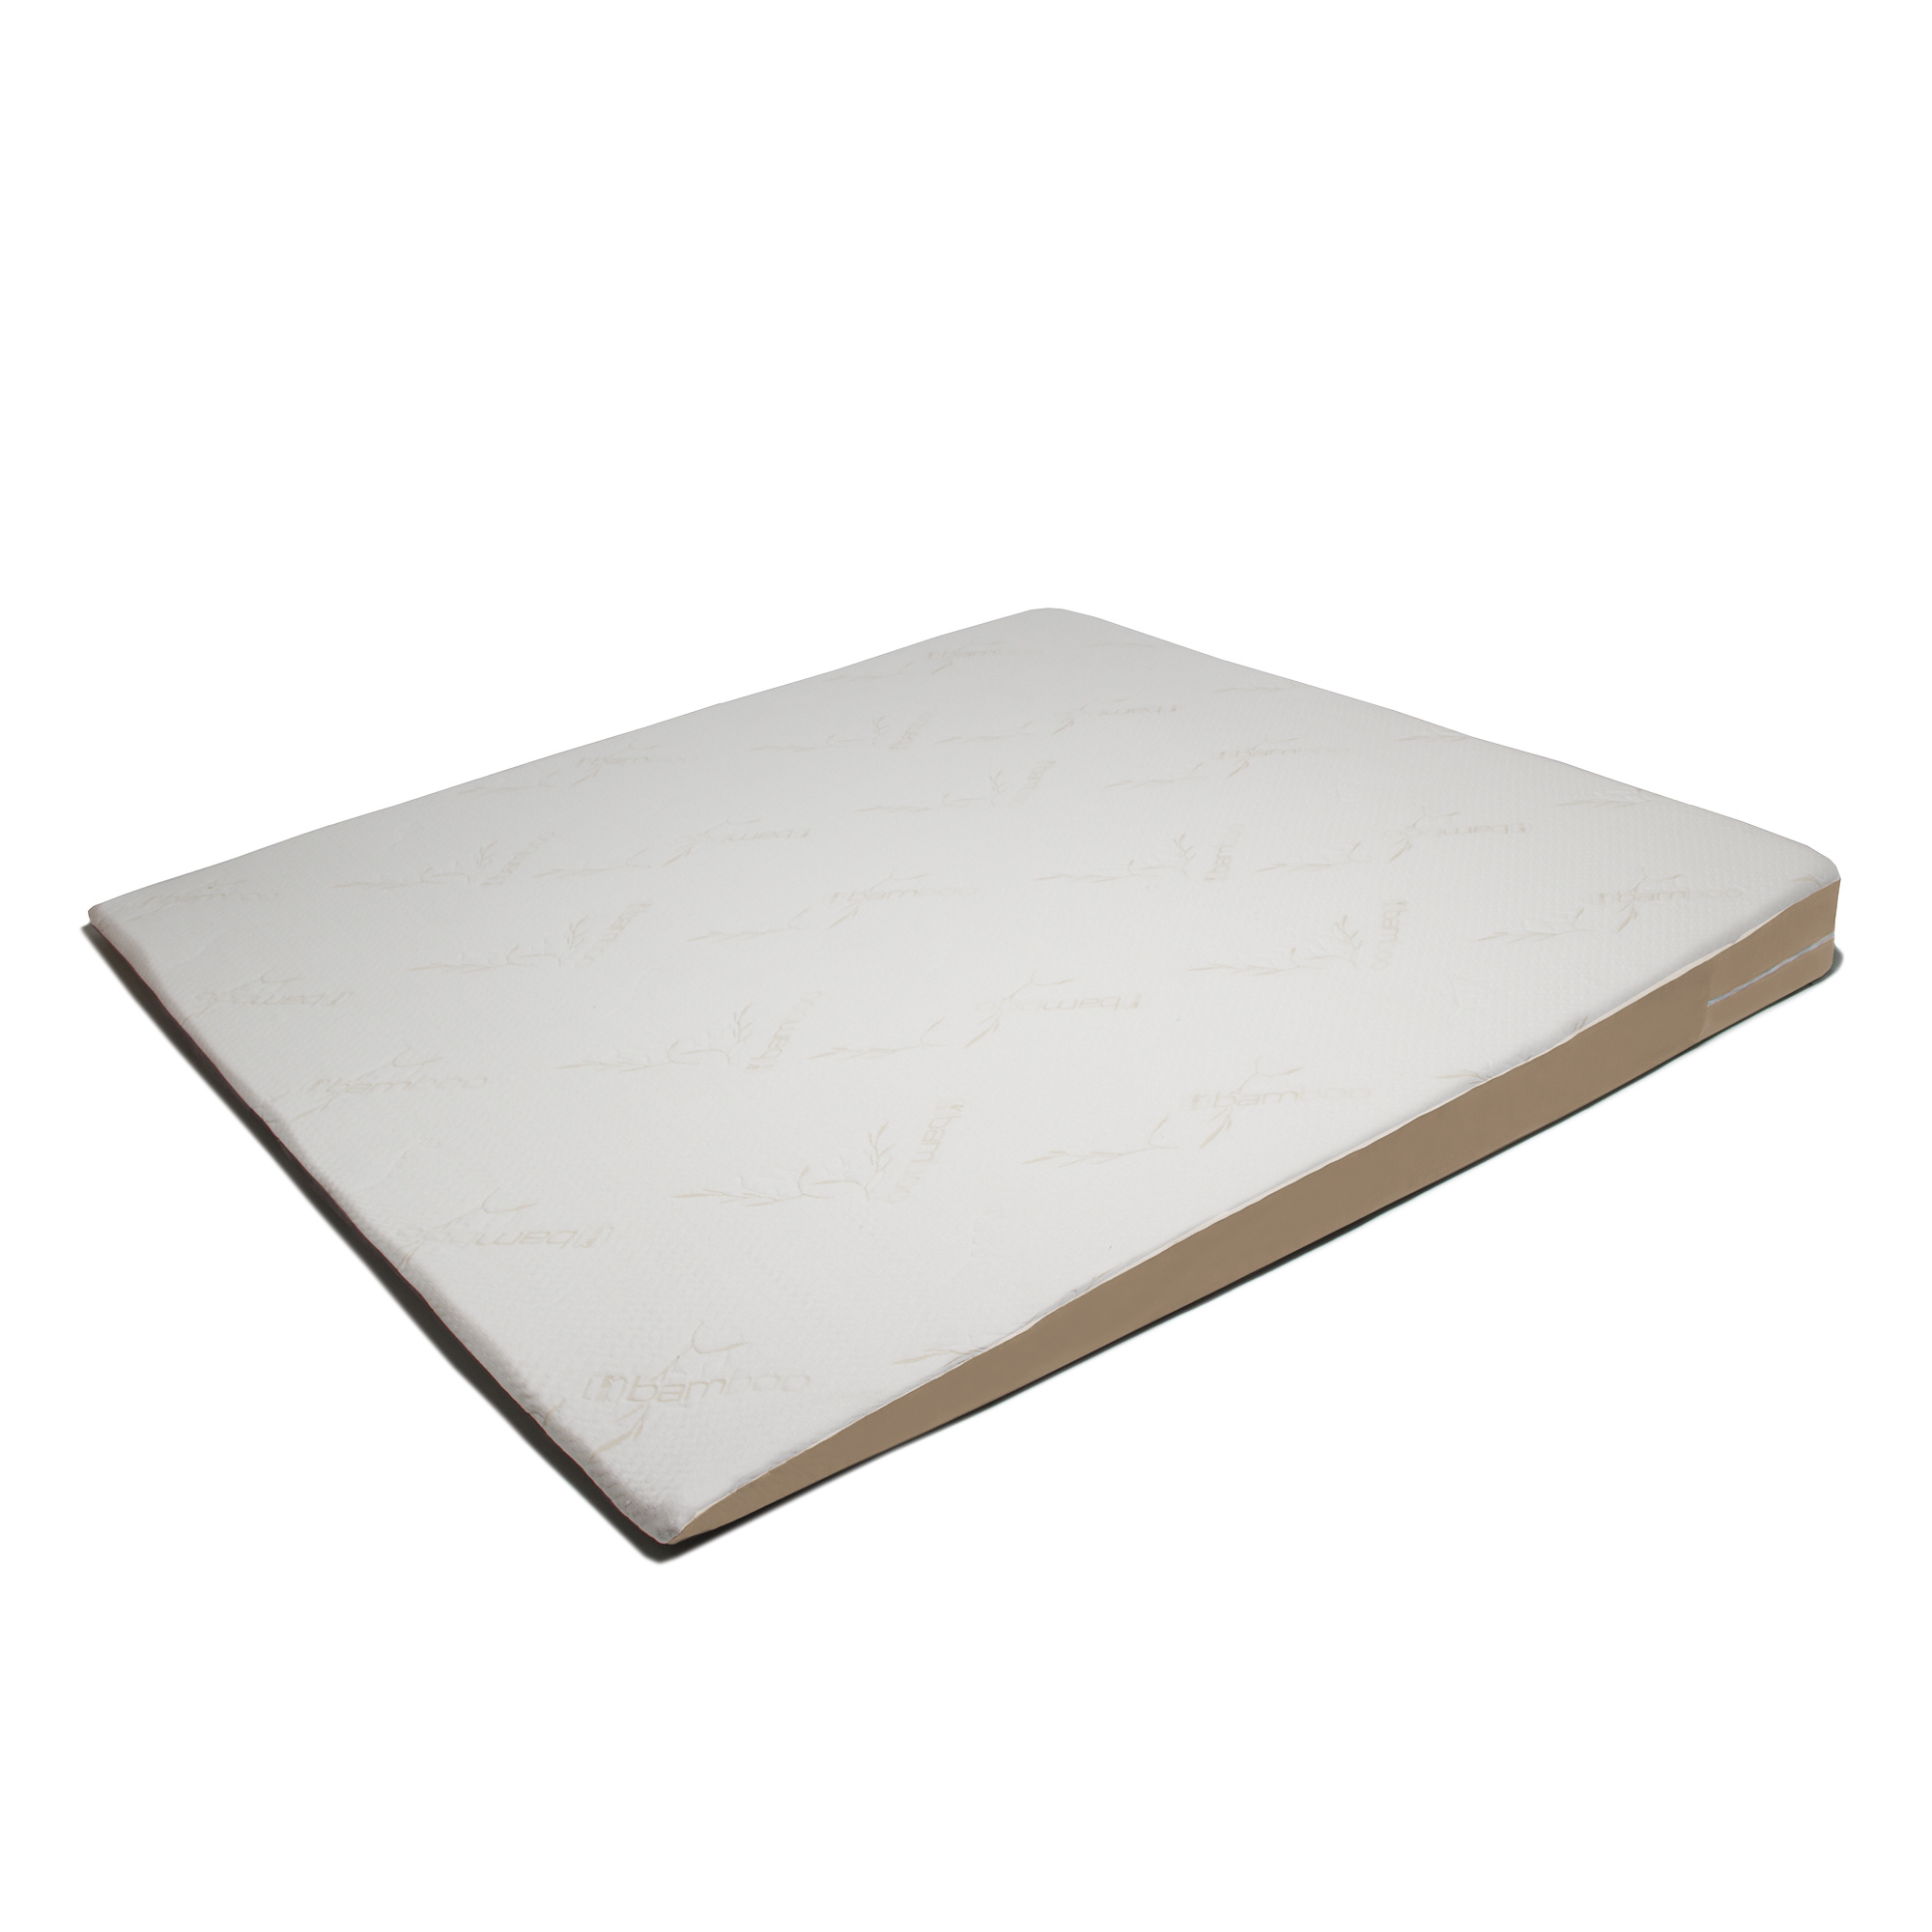 bed wedge foam wedge bed pillow